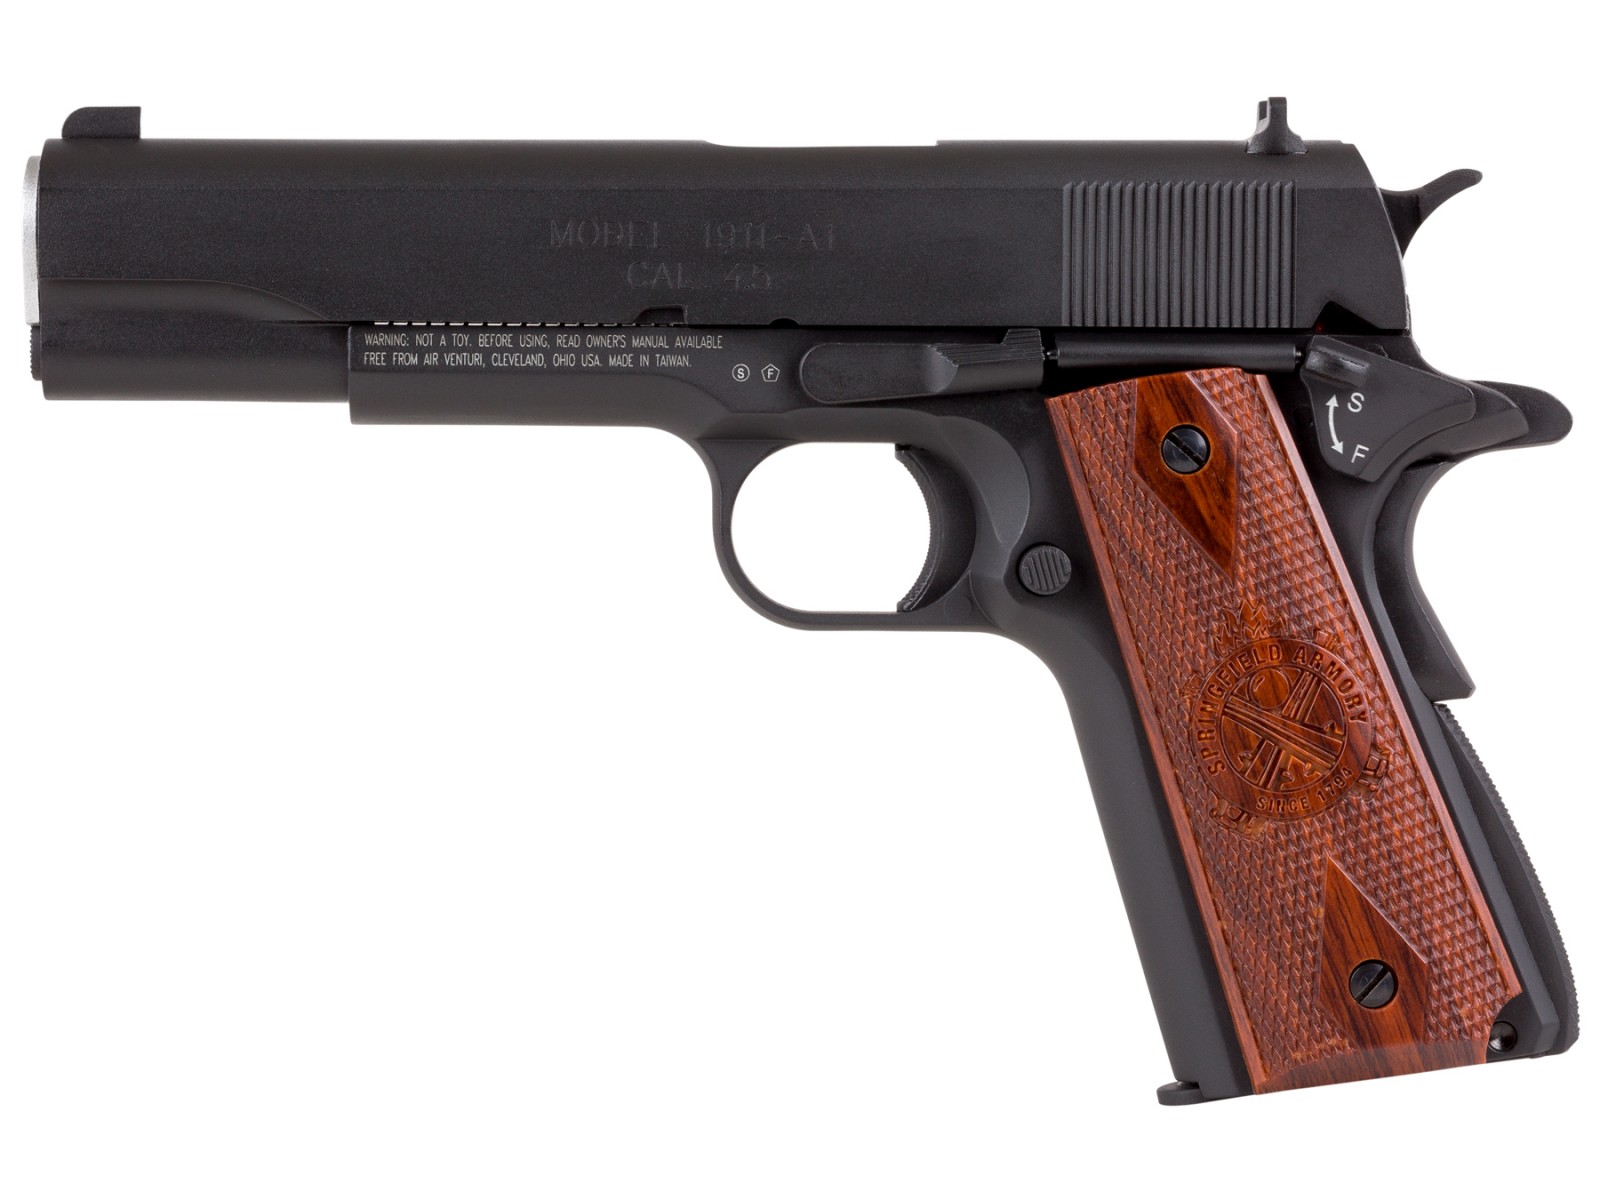 Number #1 Best 1911 BB Pistols - Springfield Armory 1911